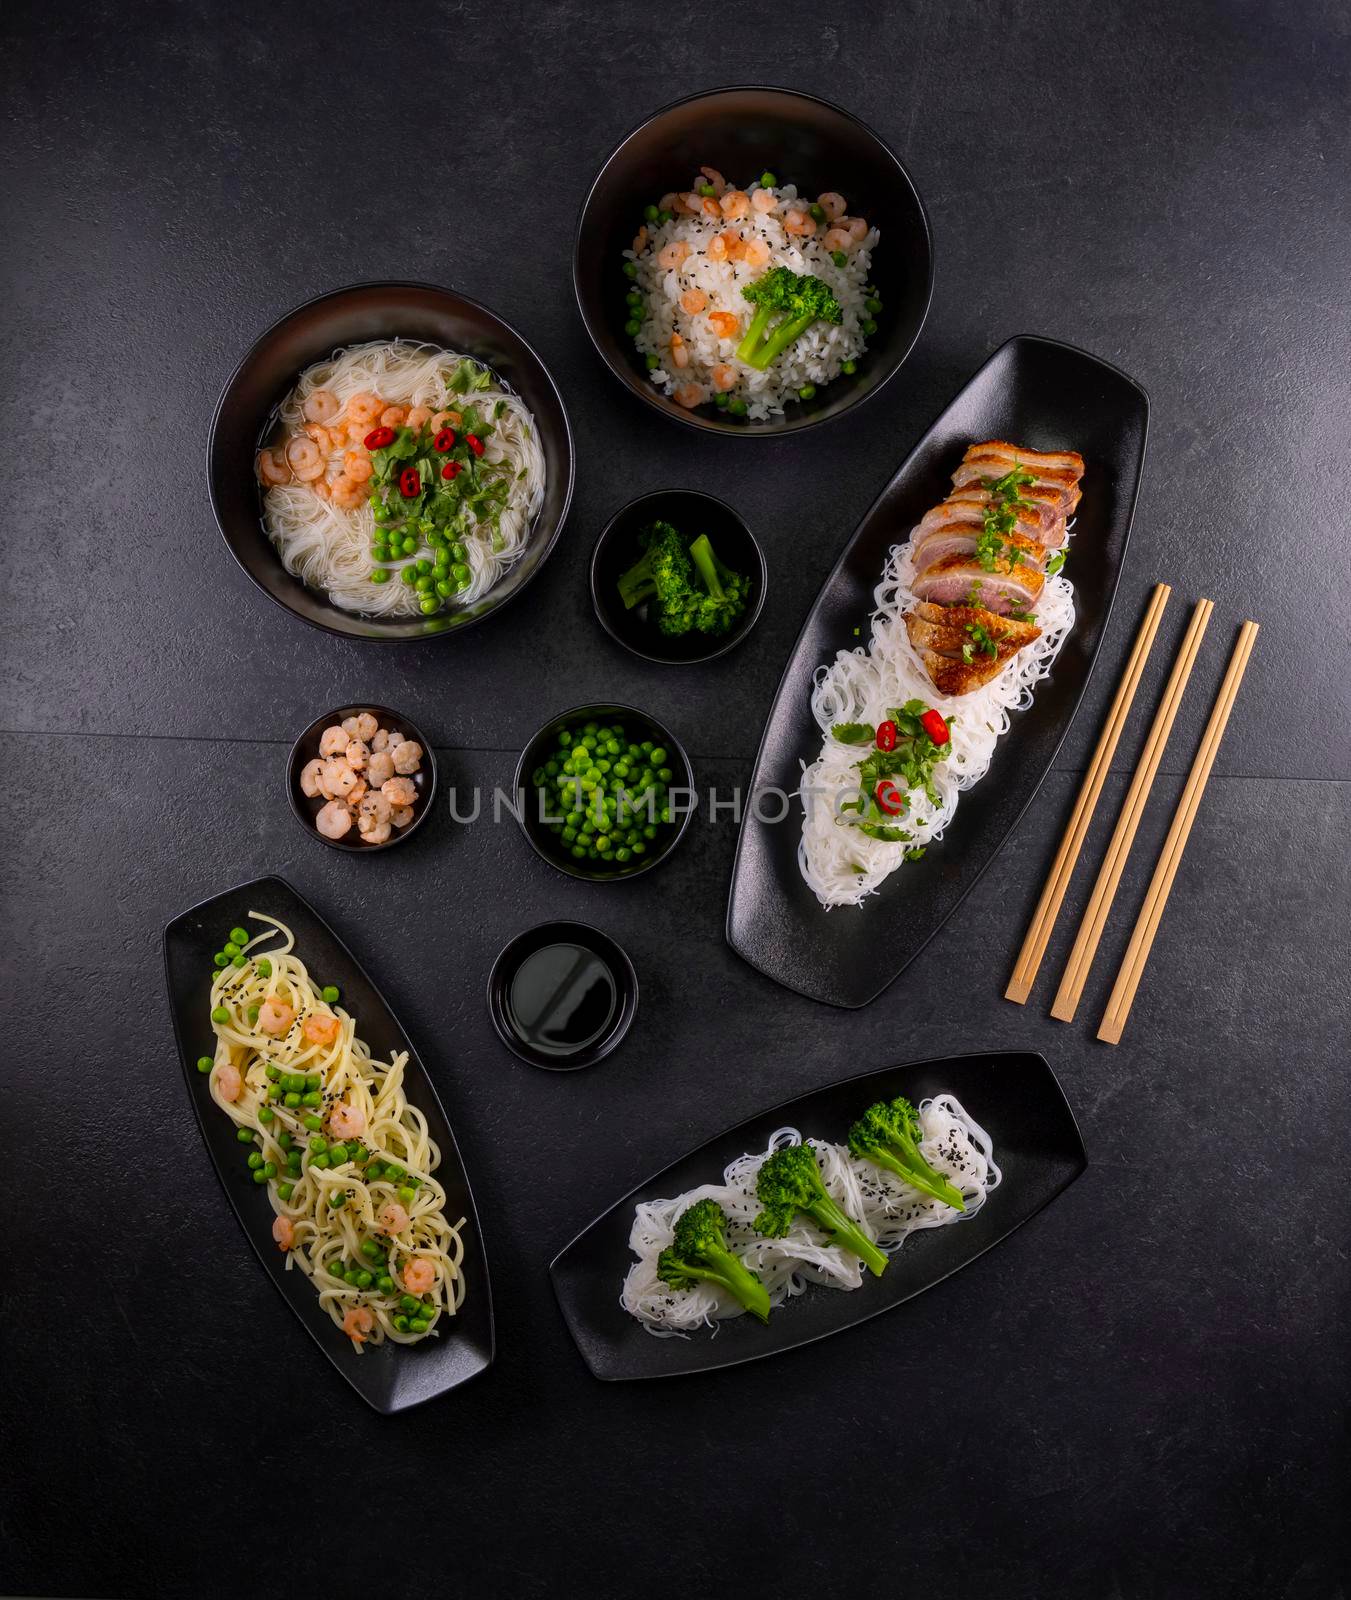 Various dishes of Asian cuisine with different types noodles and rice with shrimp, duck, vegetables and black sesame by phbcz